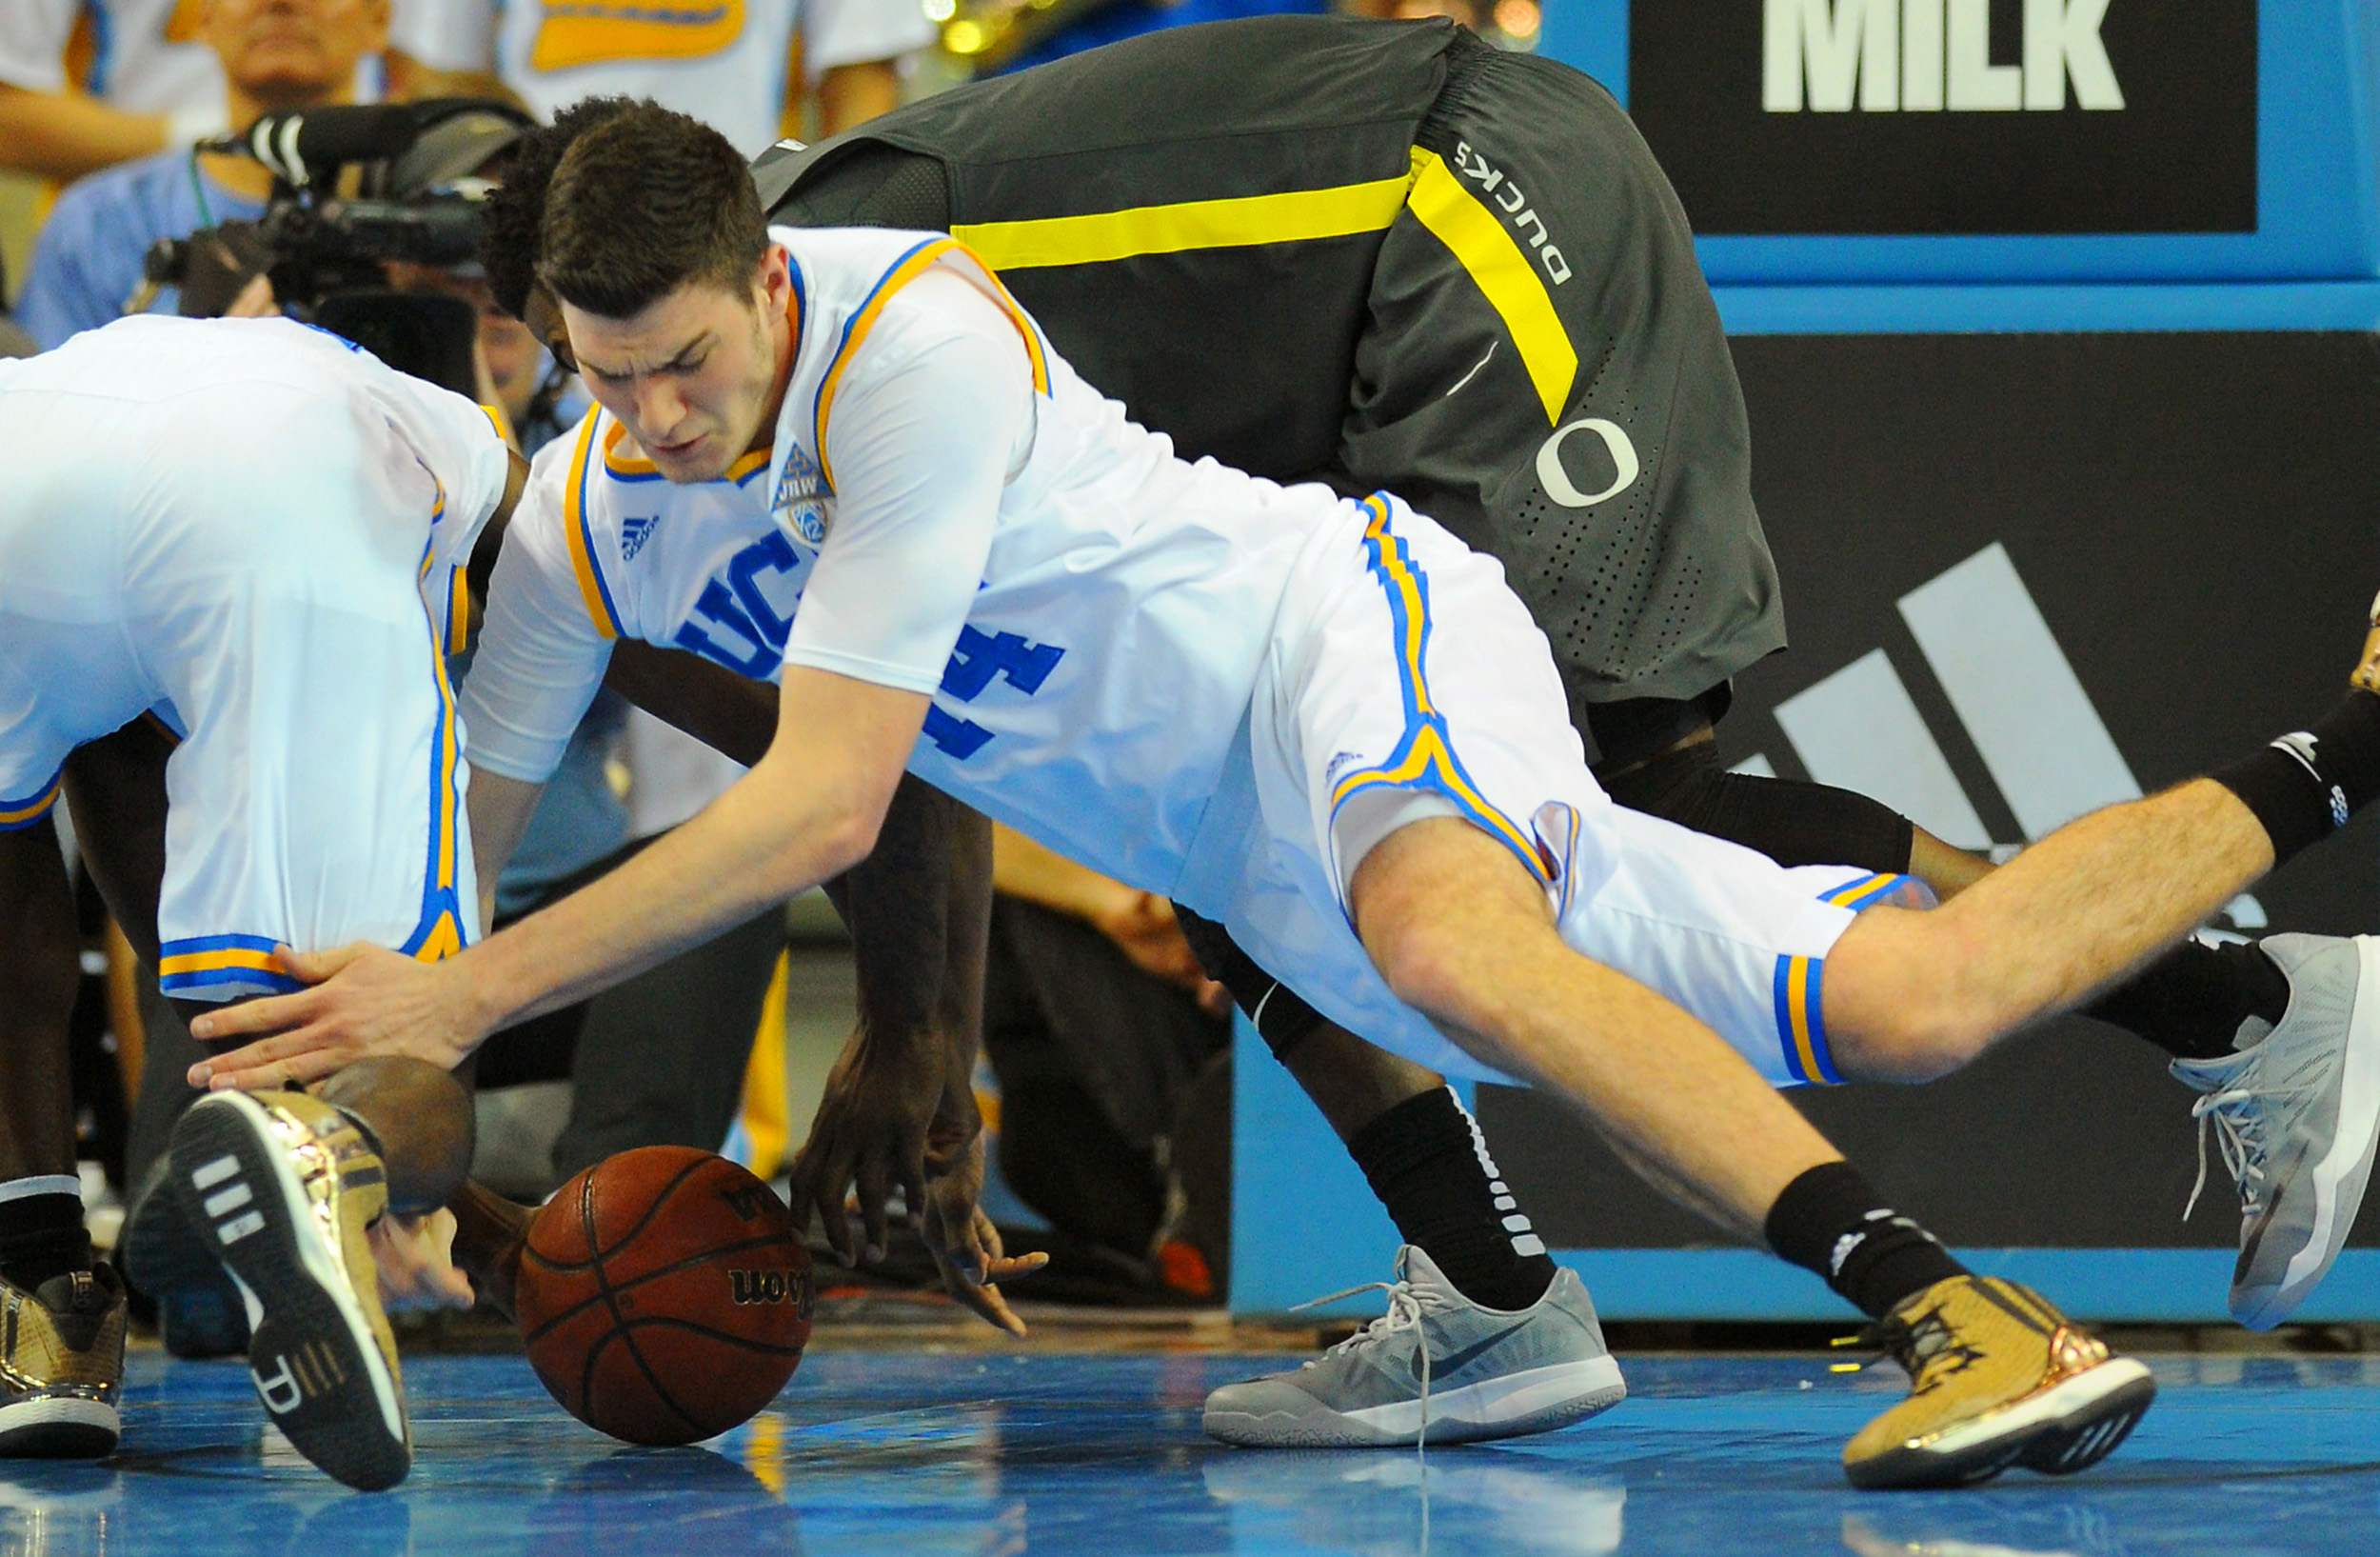 UCLA forward Gyorgy Goloman has not played this season due to a stress fracture in his leg. (Michael Owen Baker/Staff)